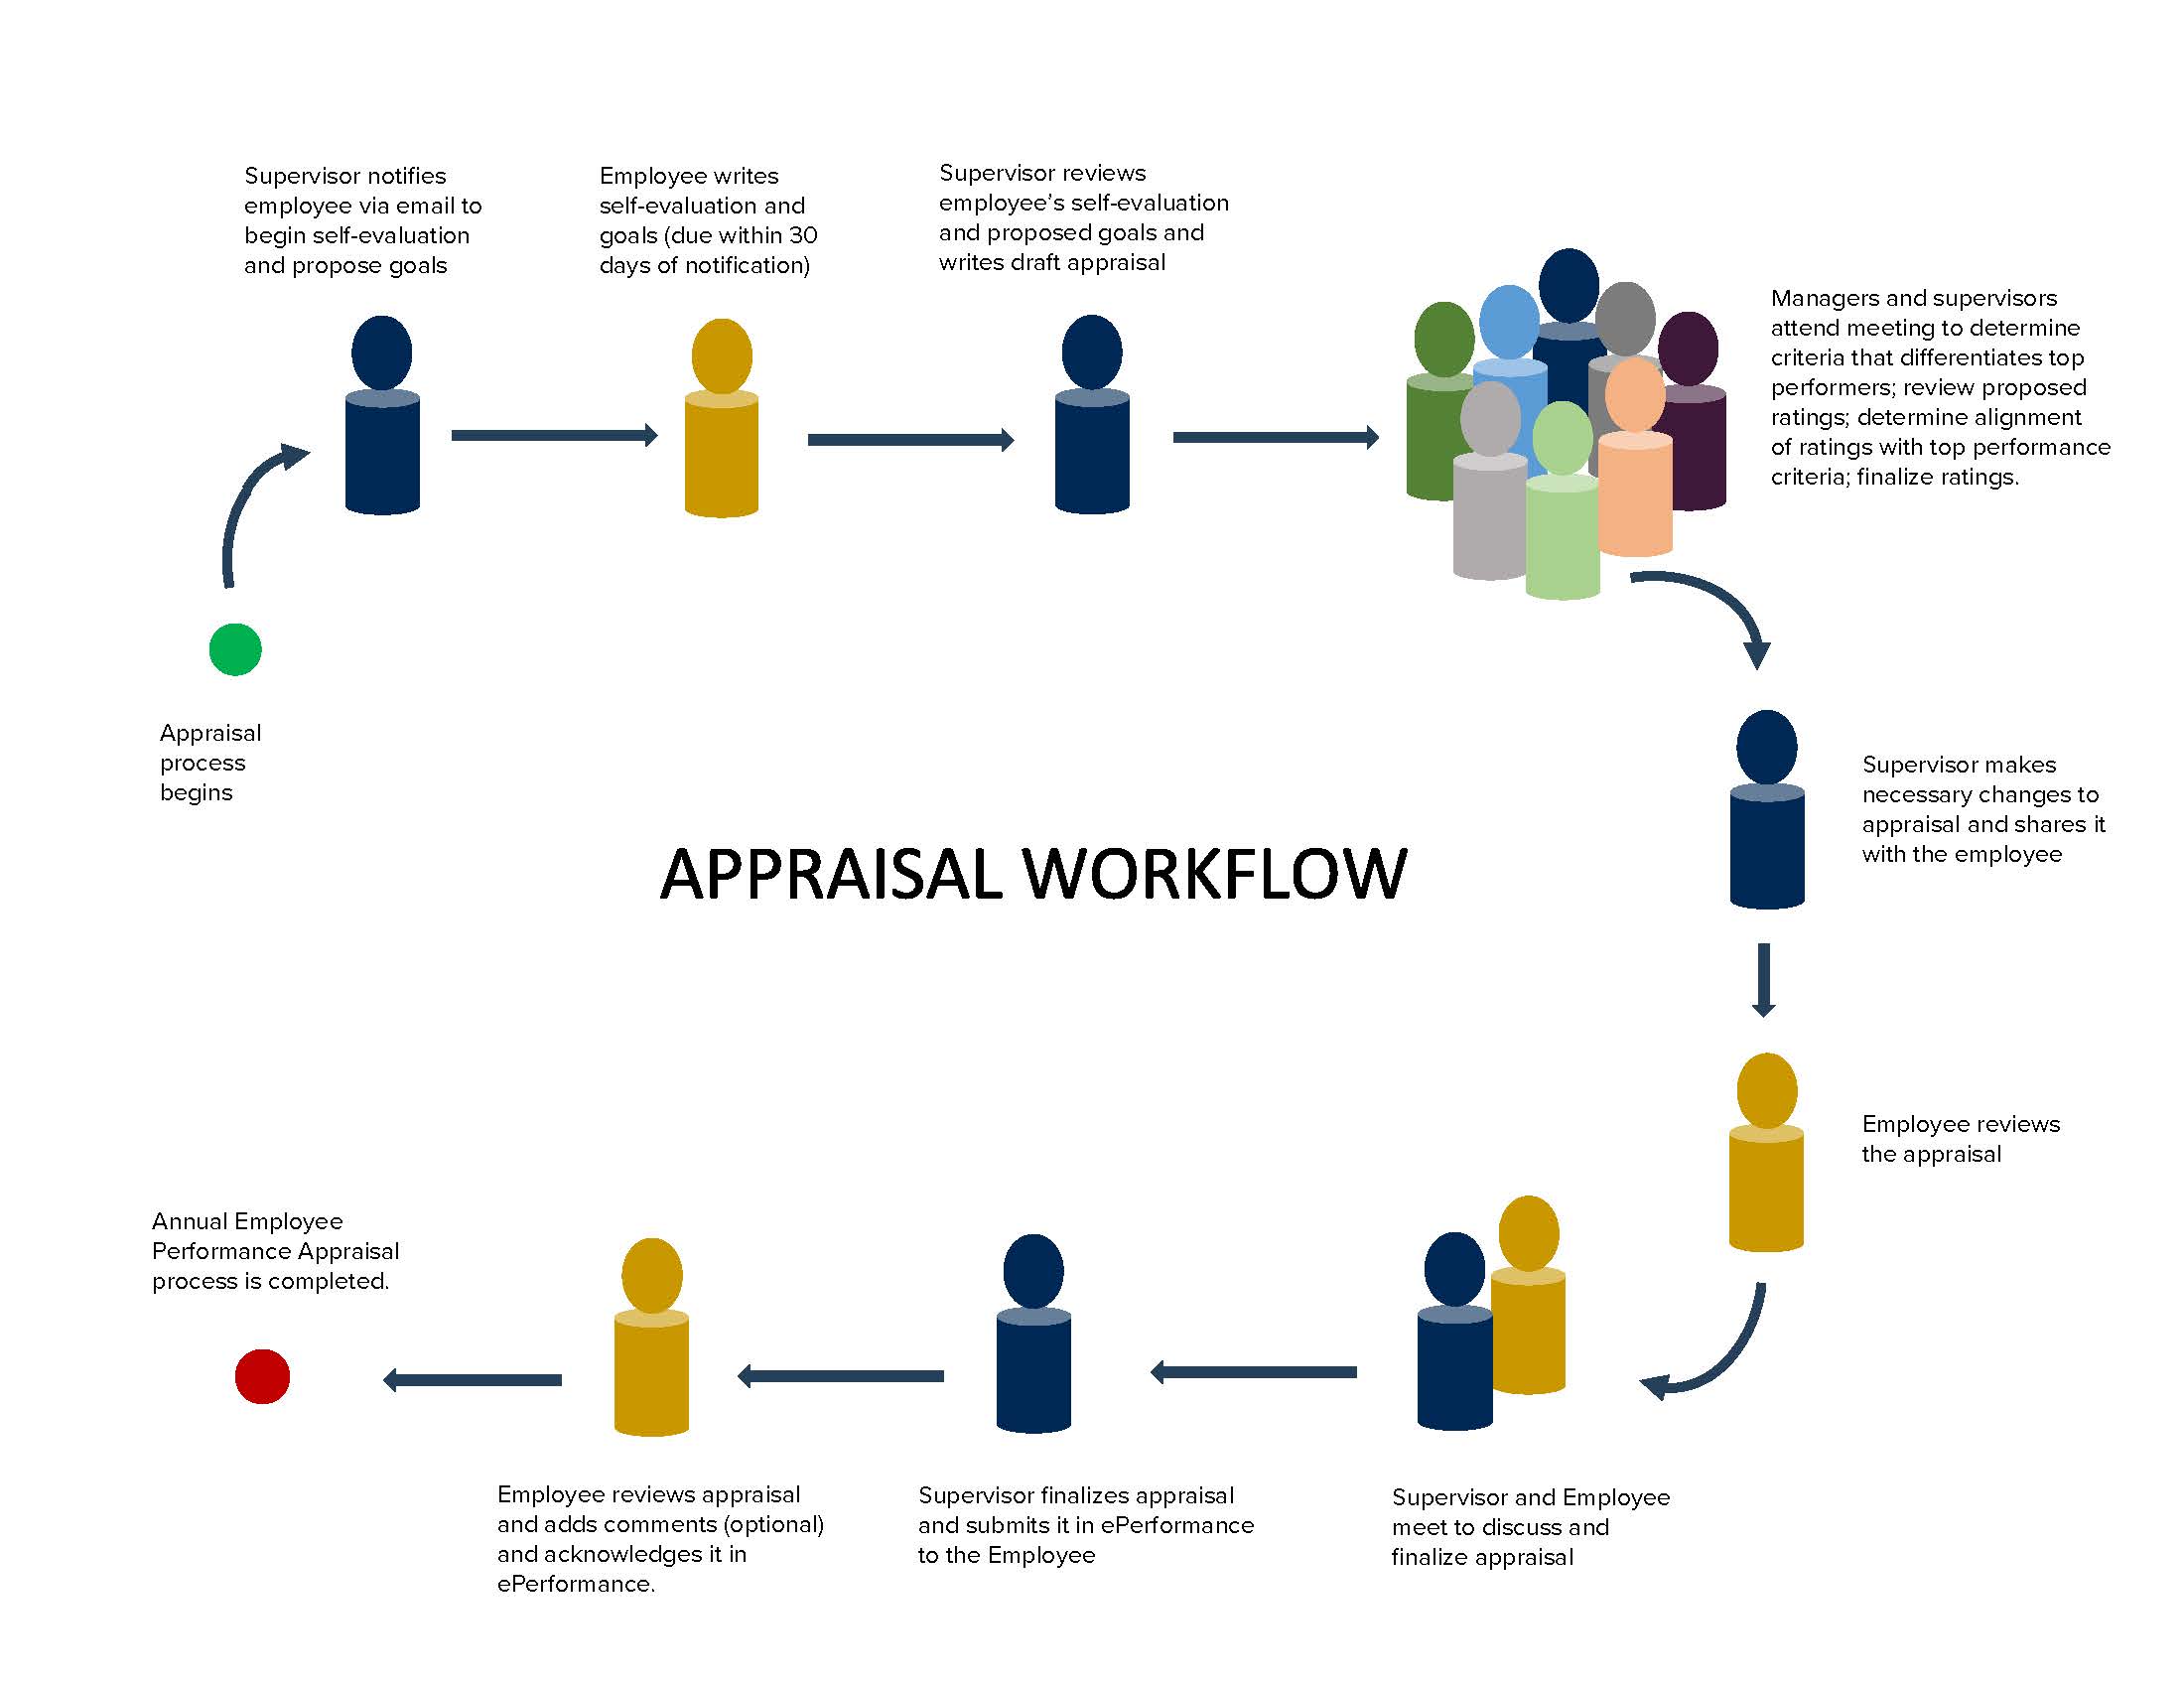 Workflow displaying the steps in the annual ePerformance process. A PDF version is available for download.